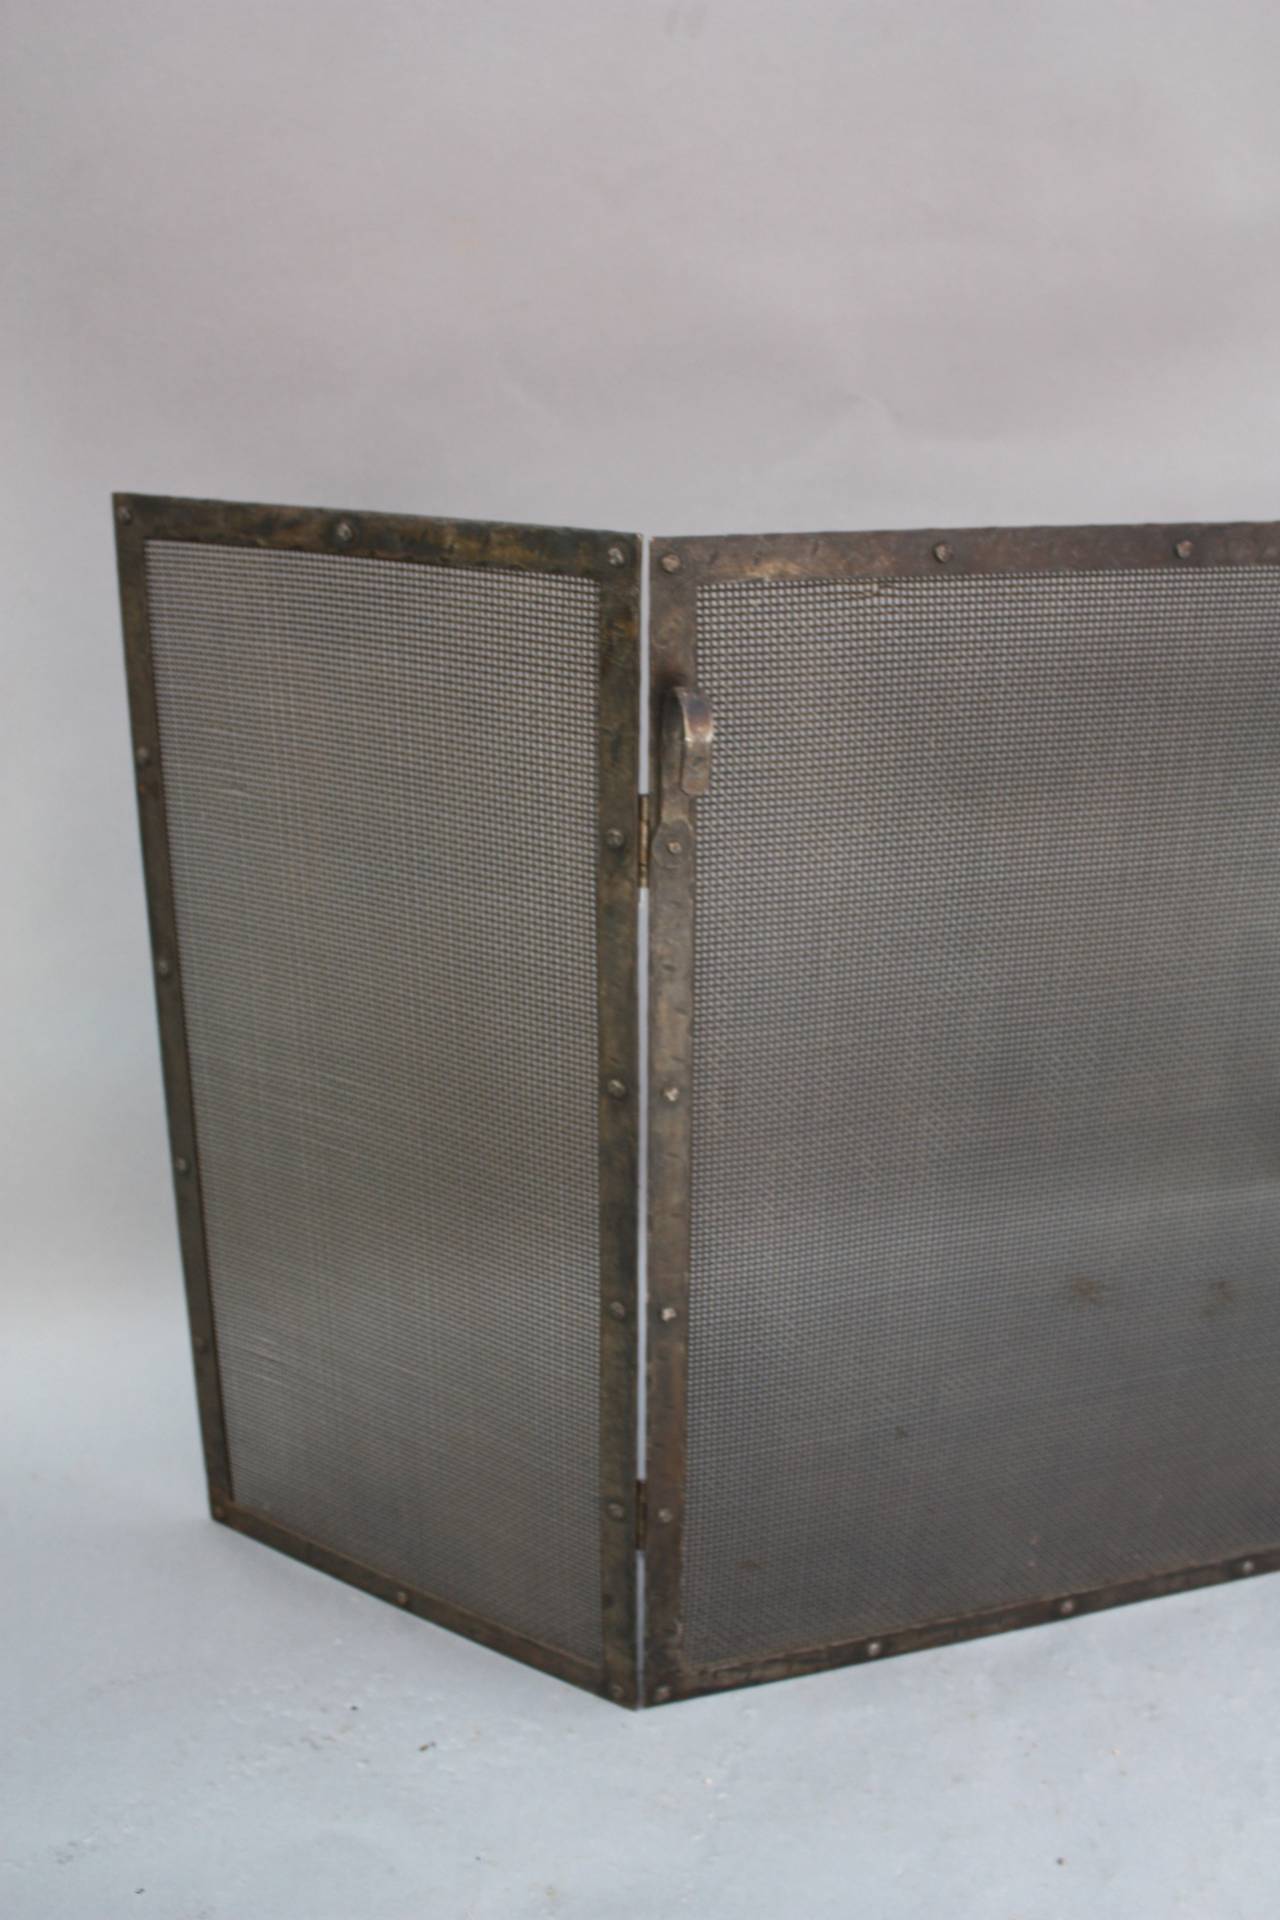 1920s wrought iron fire screen with riveted construction. The large panel measures 36 wide and the two side panels measure 15 wide. The height 30 1/4 tall.